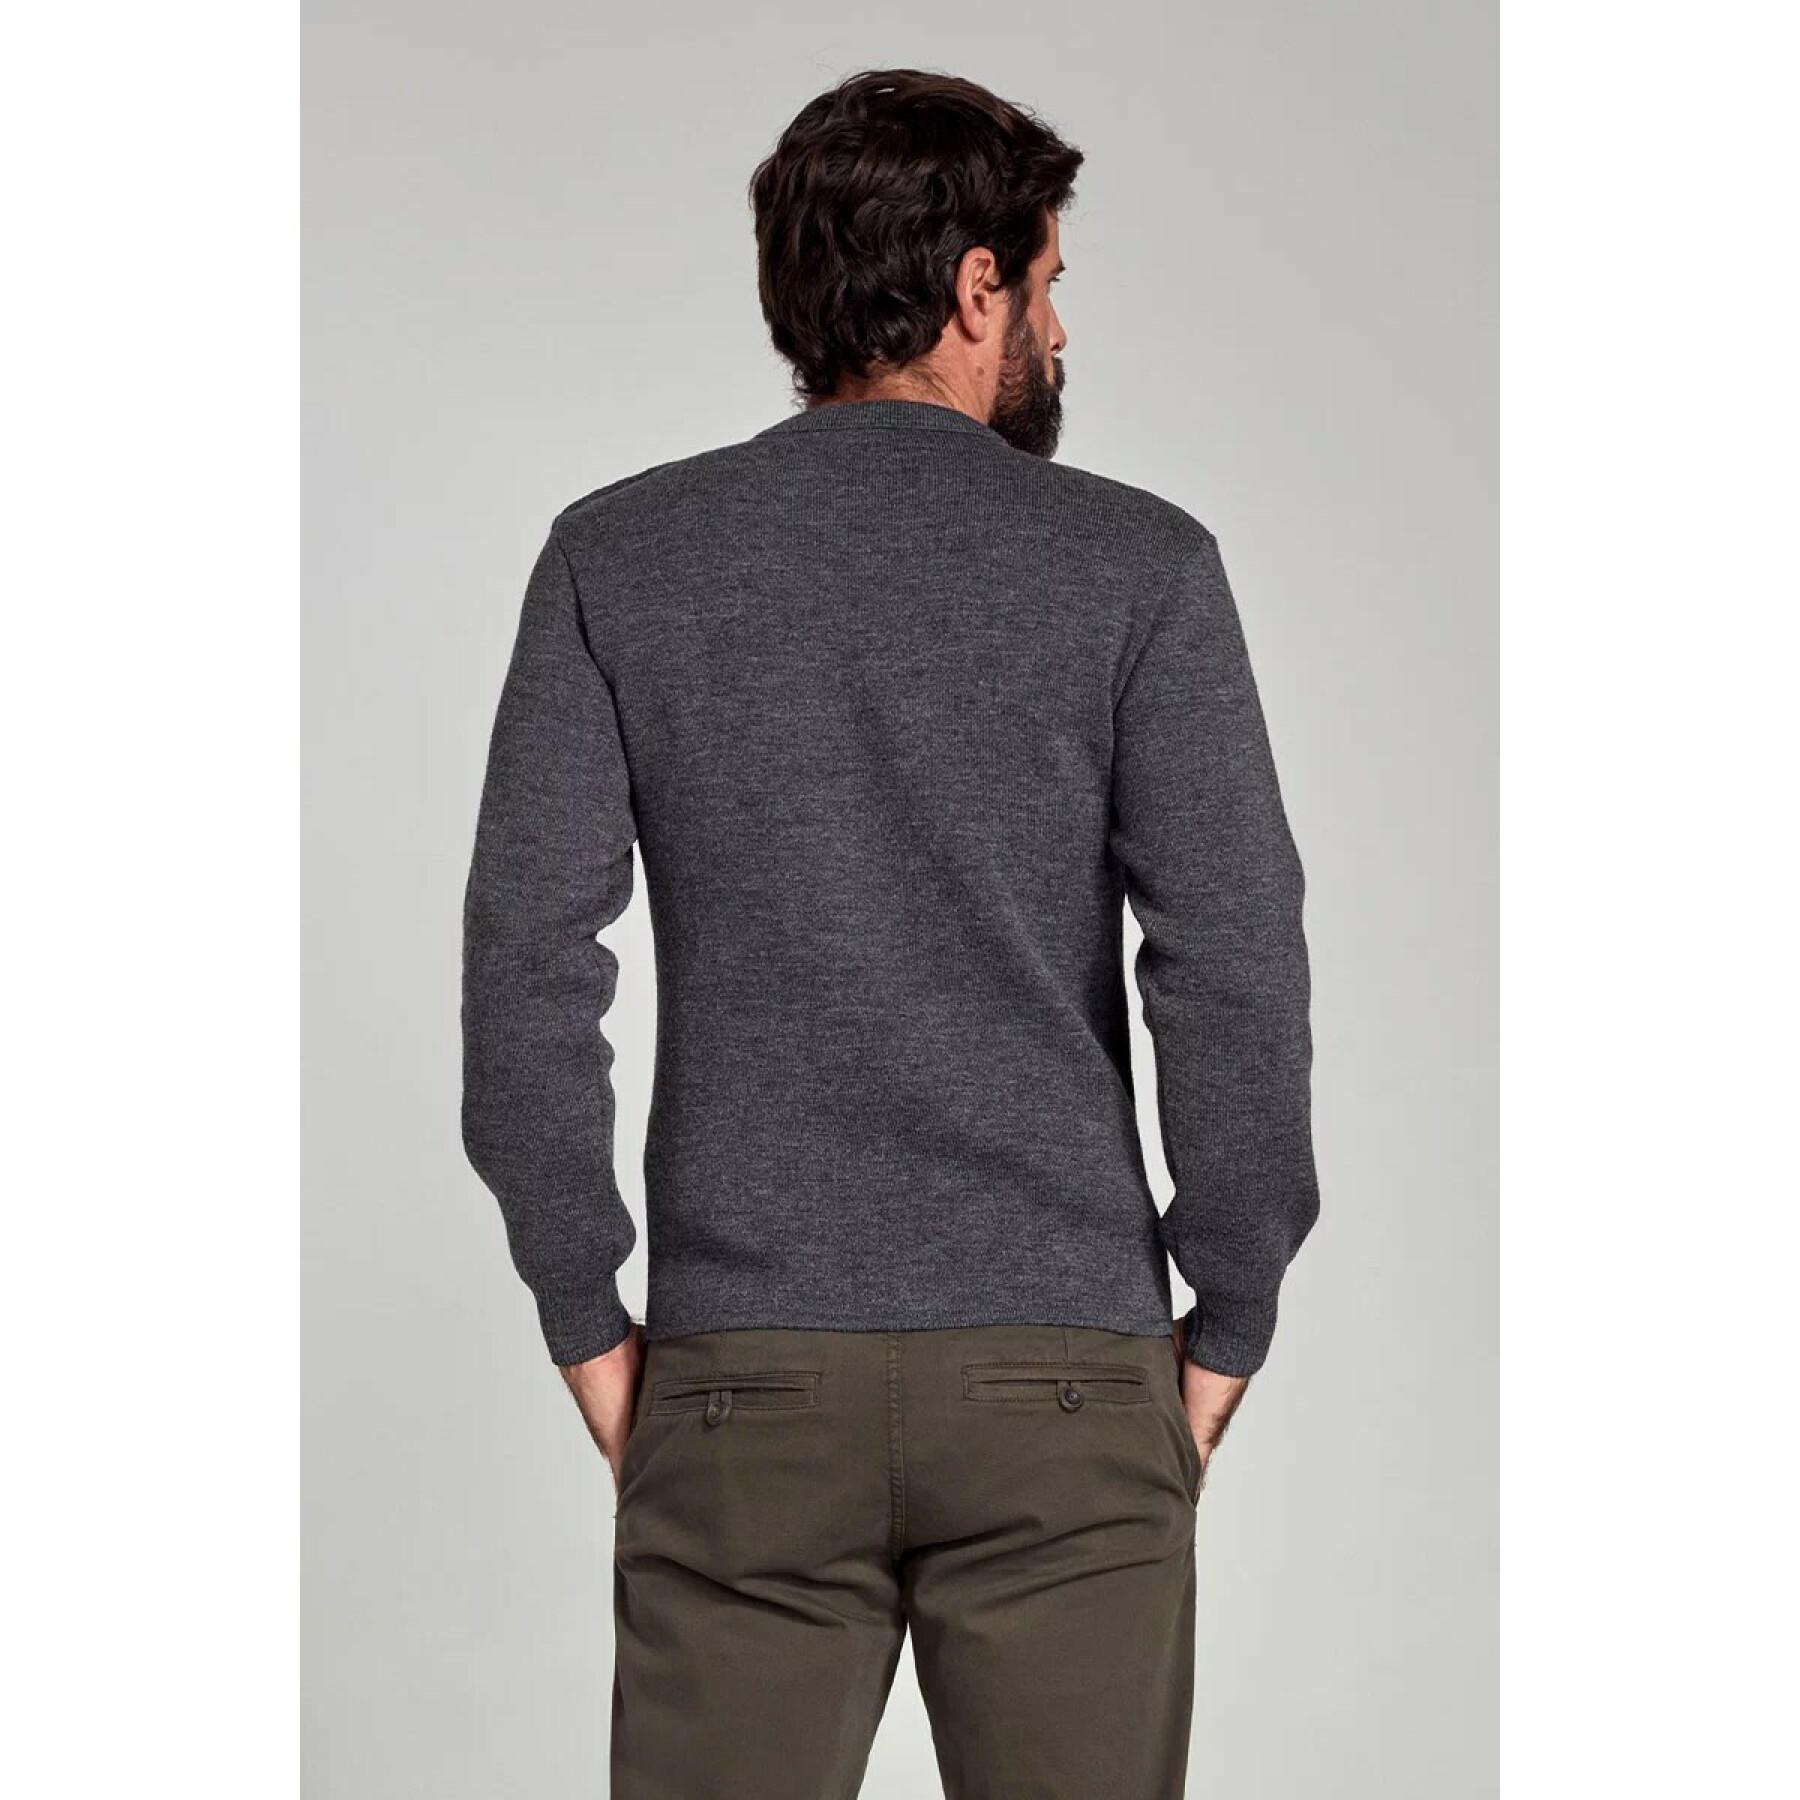 Plain navy sweater Armor-Lux fouesnant